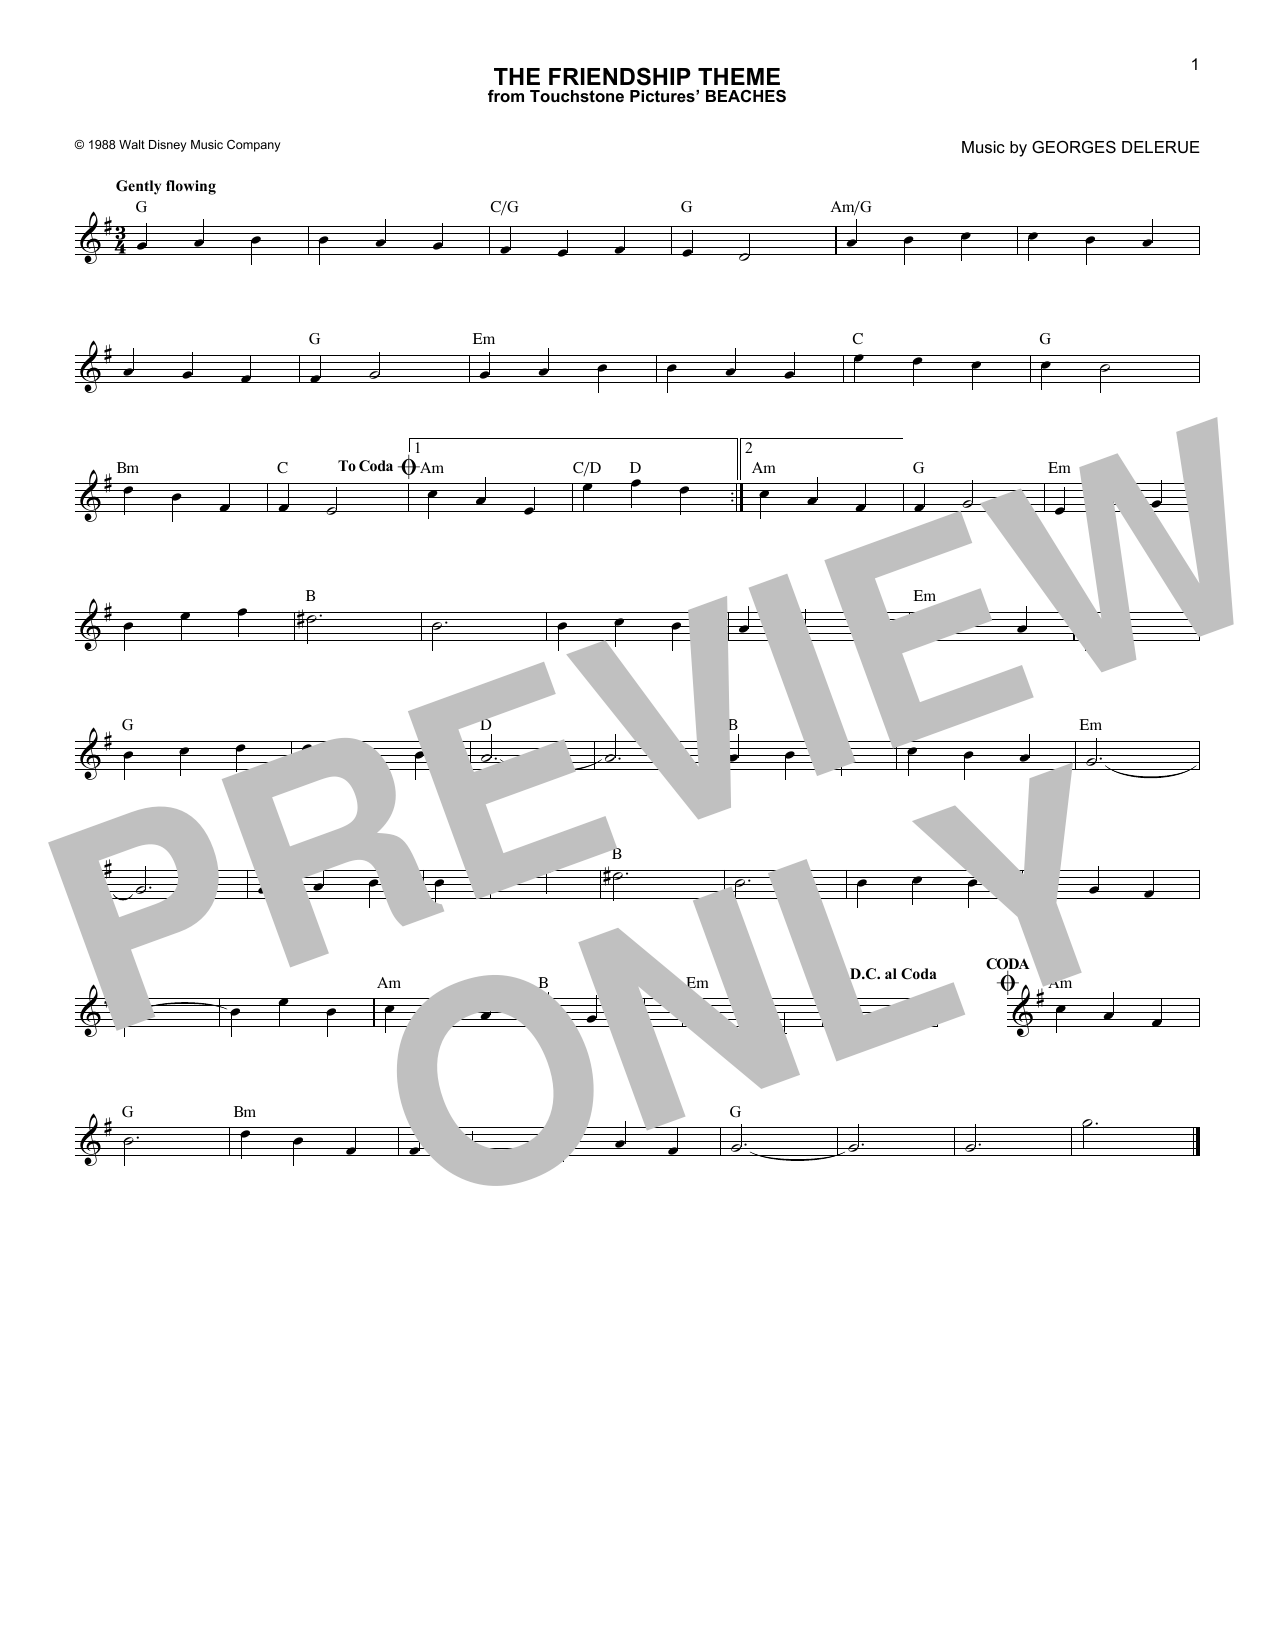 Georges Delerue The Friendship Theme sheet music notes and chords. Download Printable PDF.